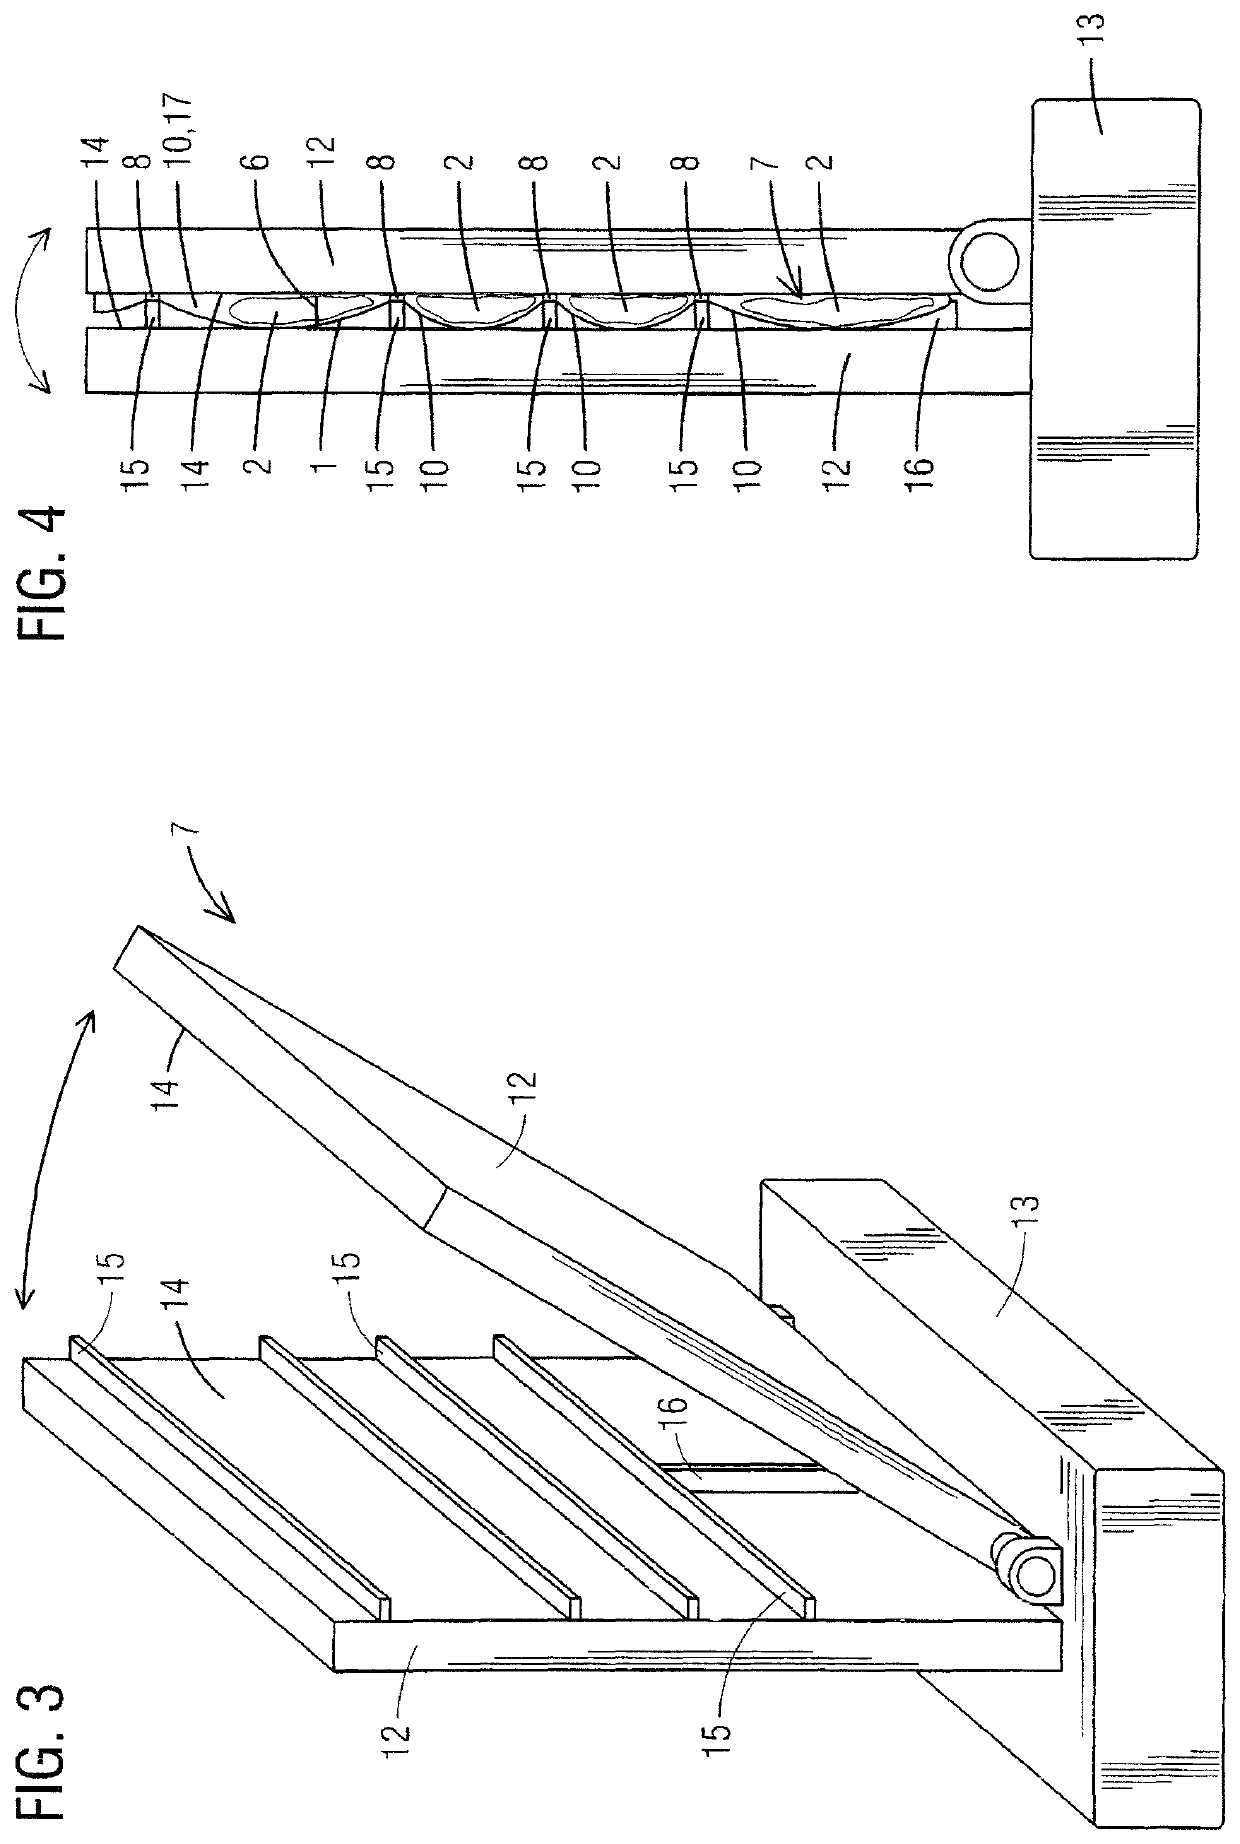 Paint storage system, device, and method for storing paint